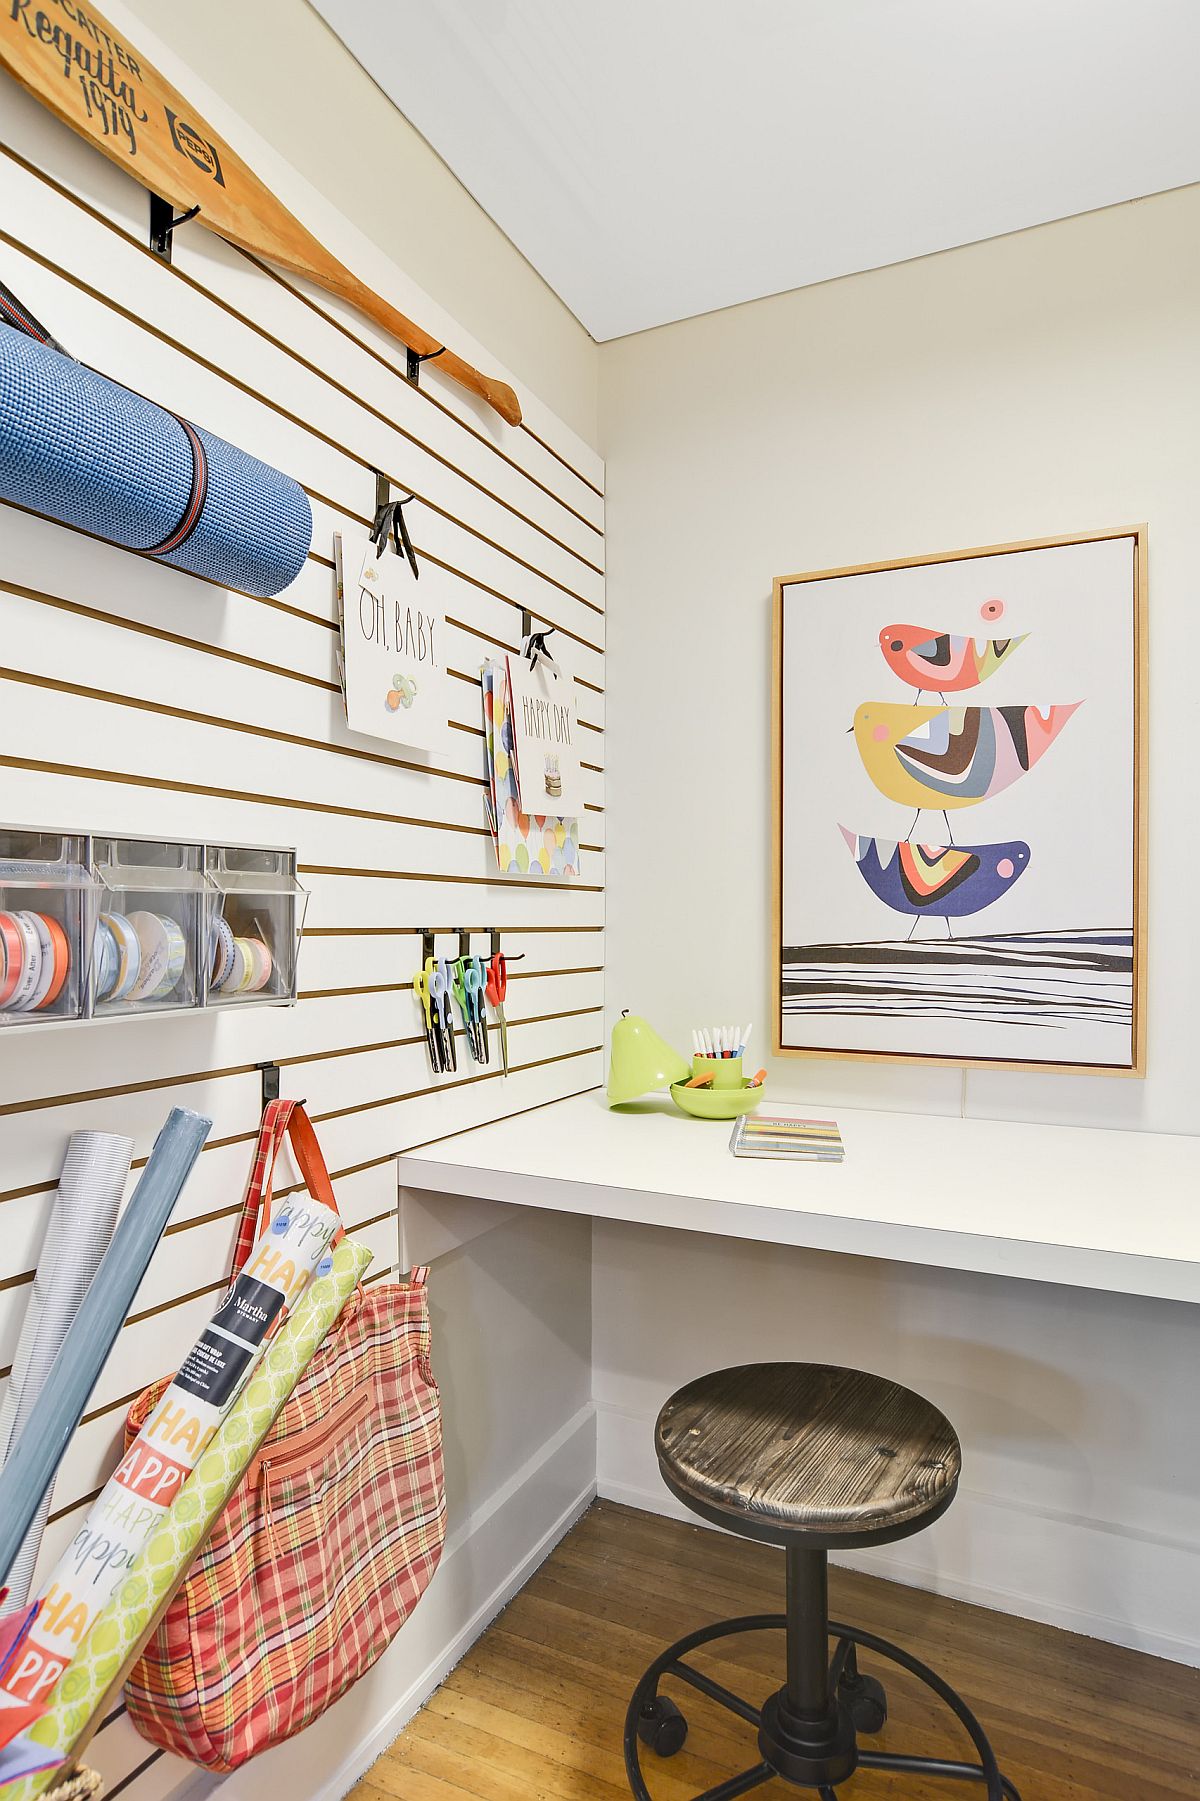 Small Craft Room - MASKerade: Craft Room / Be inspired by these craft ideas.